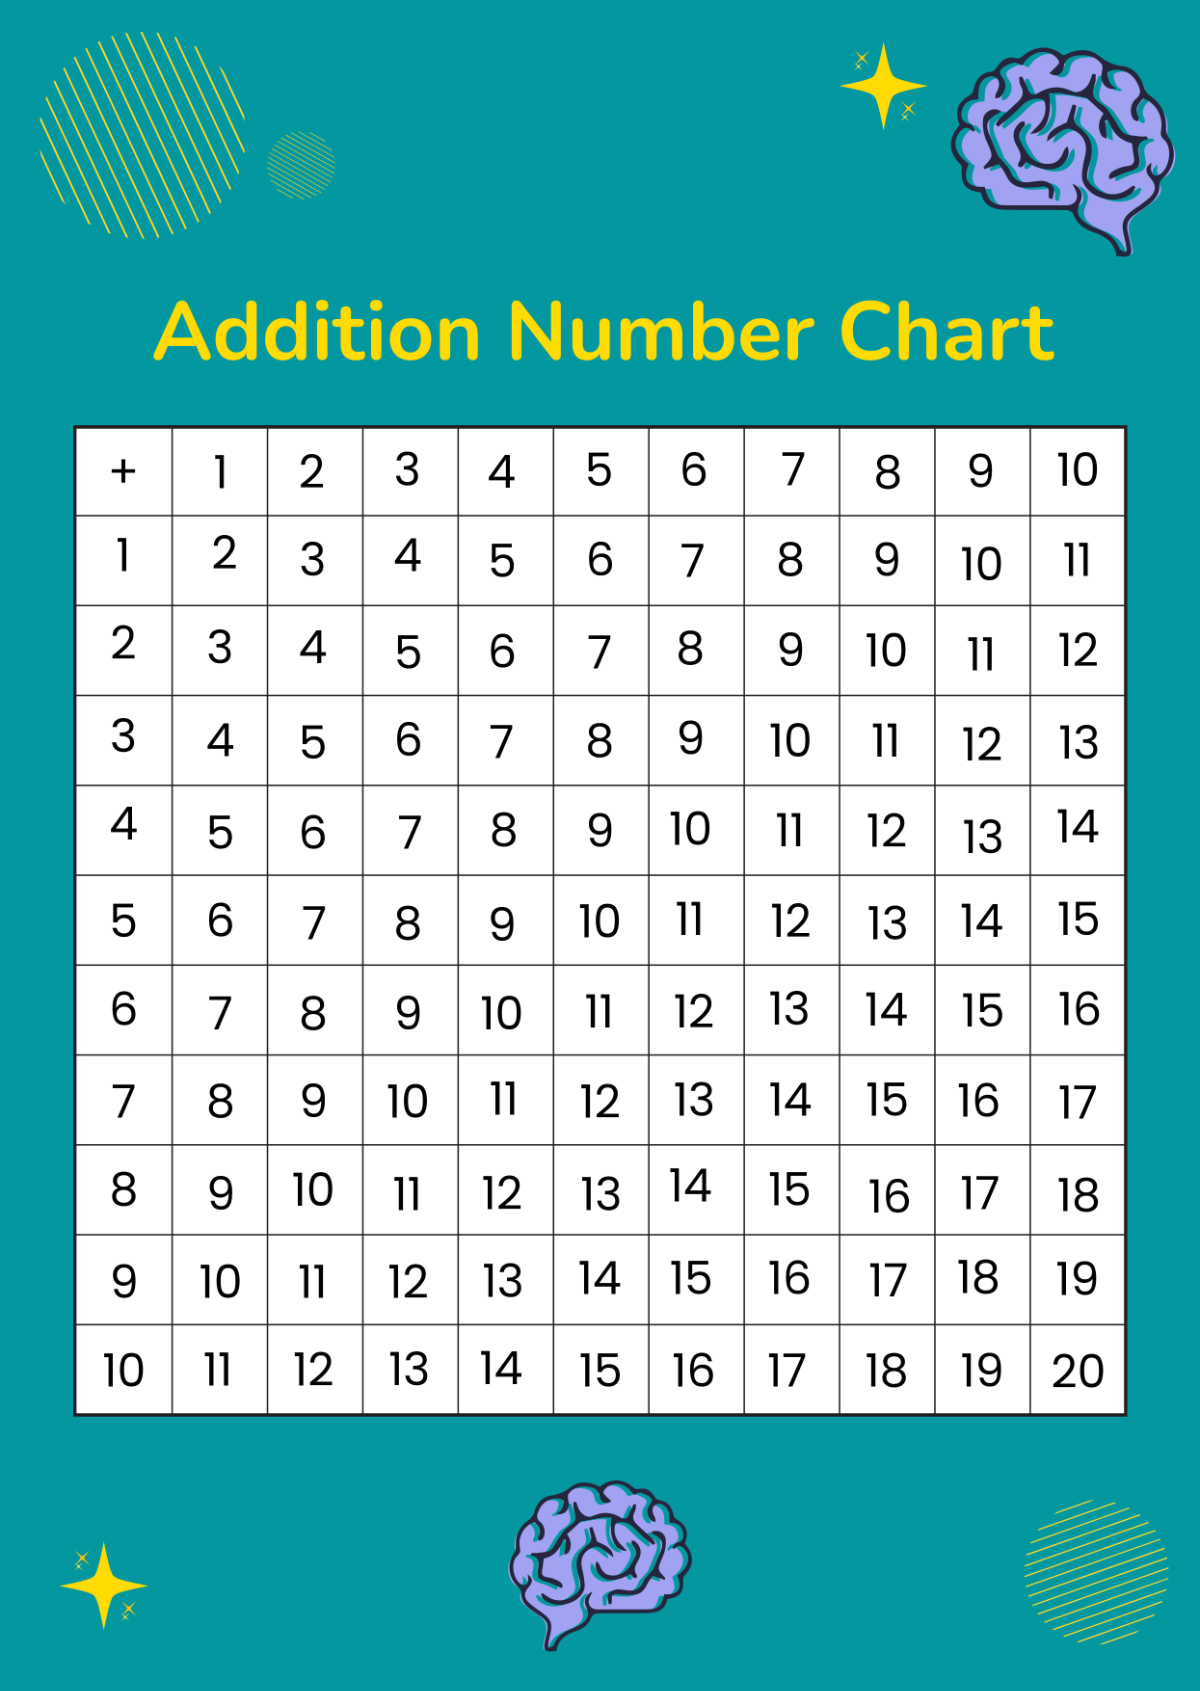 Addition Number Chart